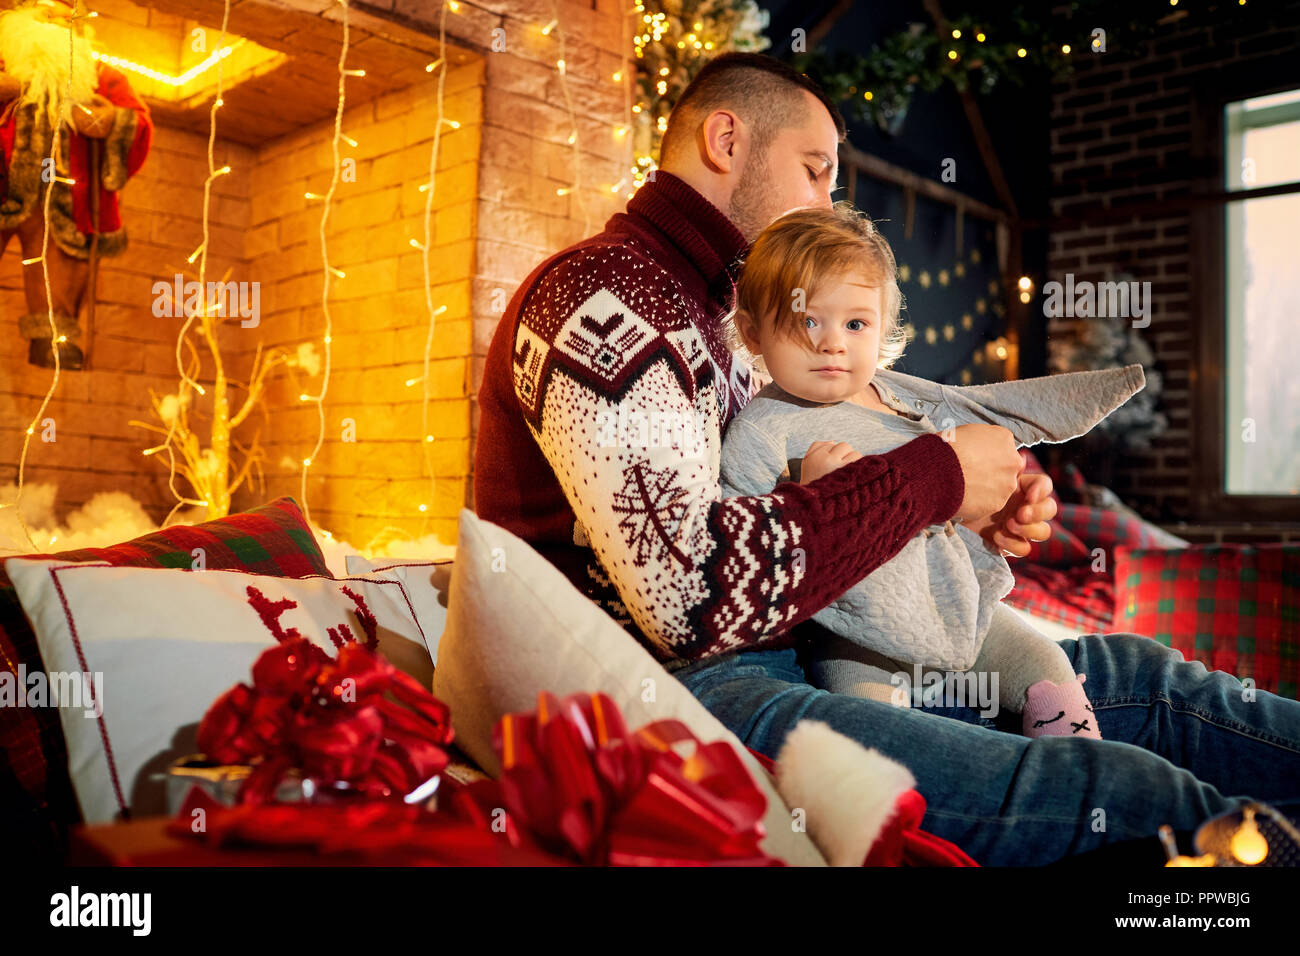 Father with a baby in a Christmas room. Stock Photo